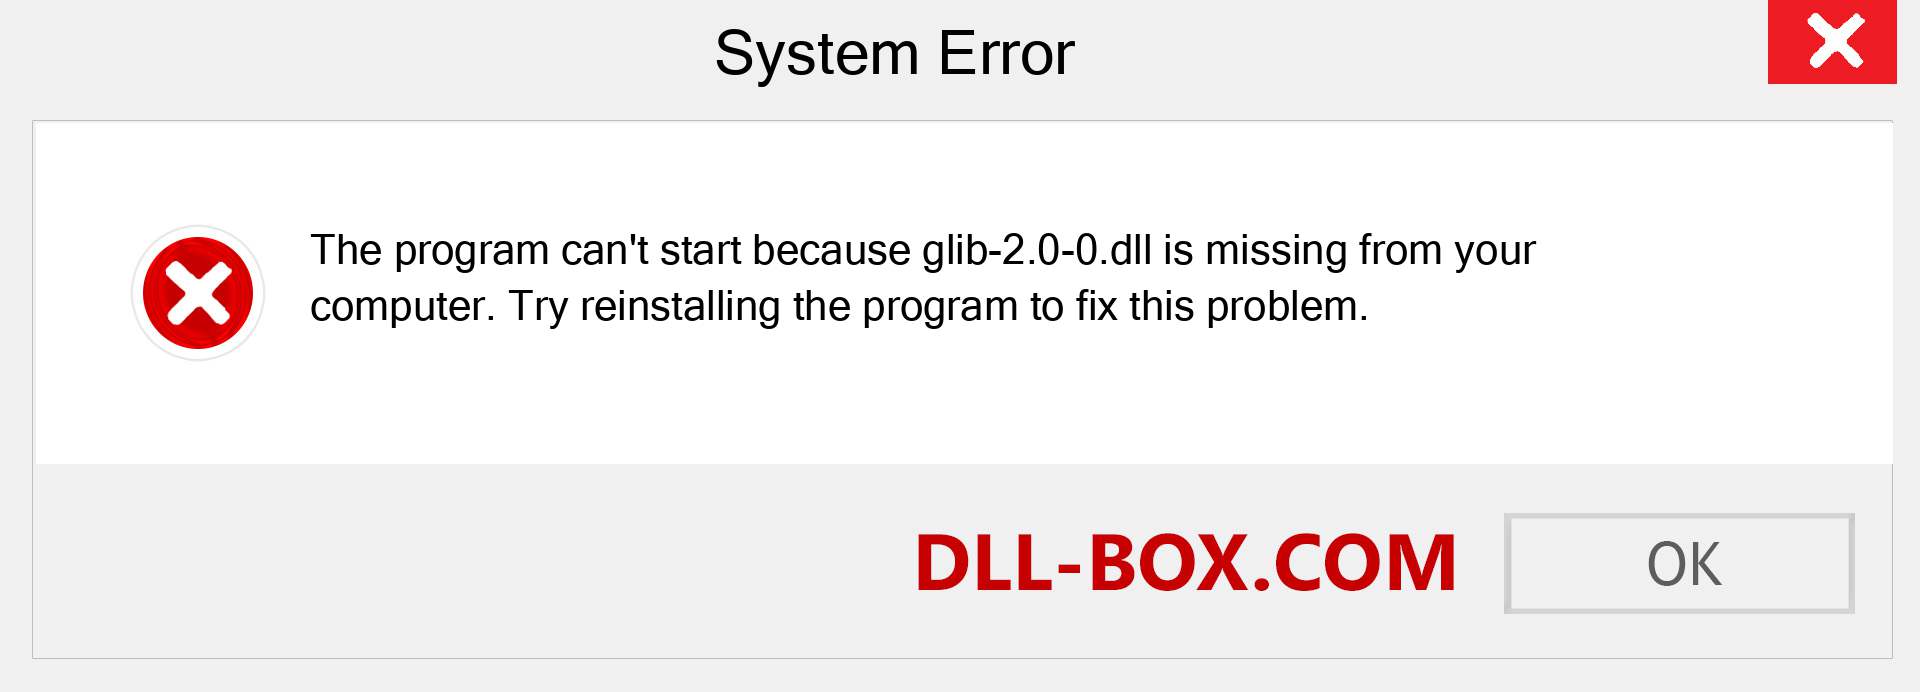  glib-2.0-0.dll file is missing?. Download for Windows 7, 8, 10 - Fix  glib-2.0-0 dll Missing Error on Windows, photos, images